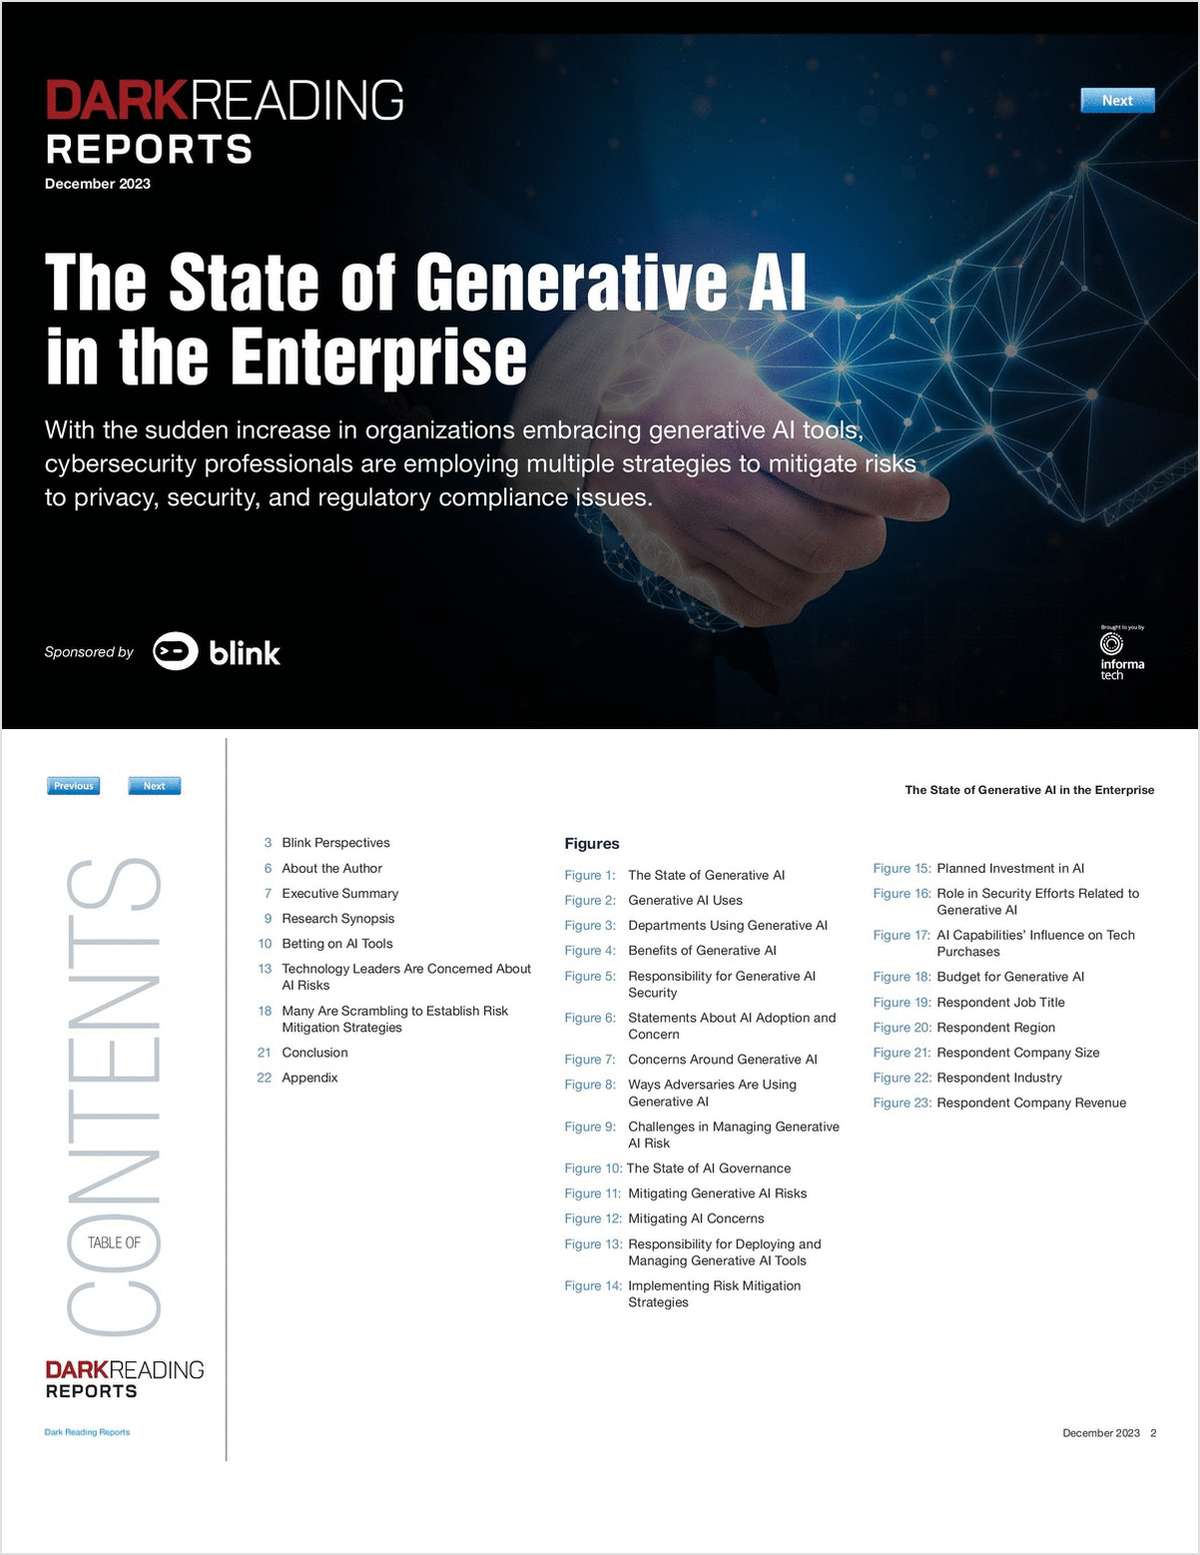 The State of Generative AI in the Enterprise